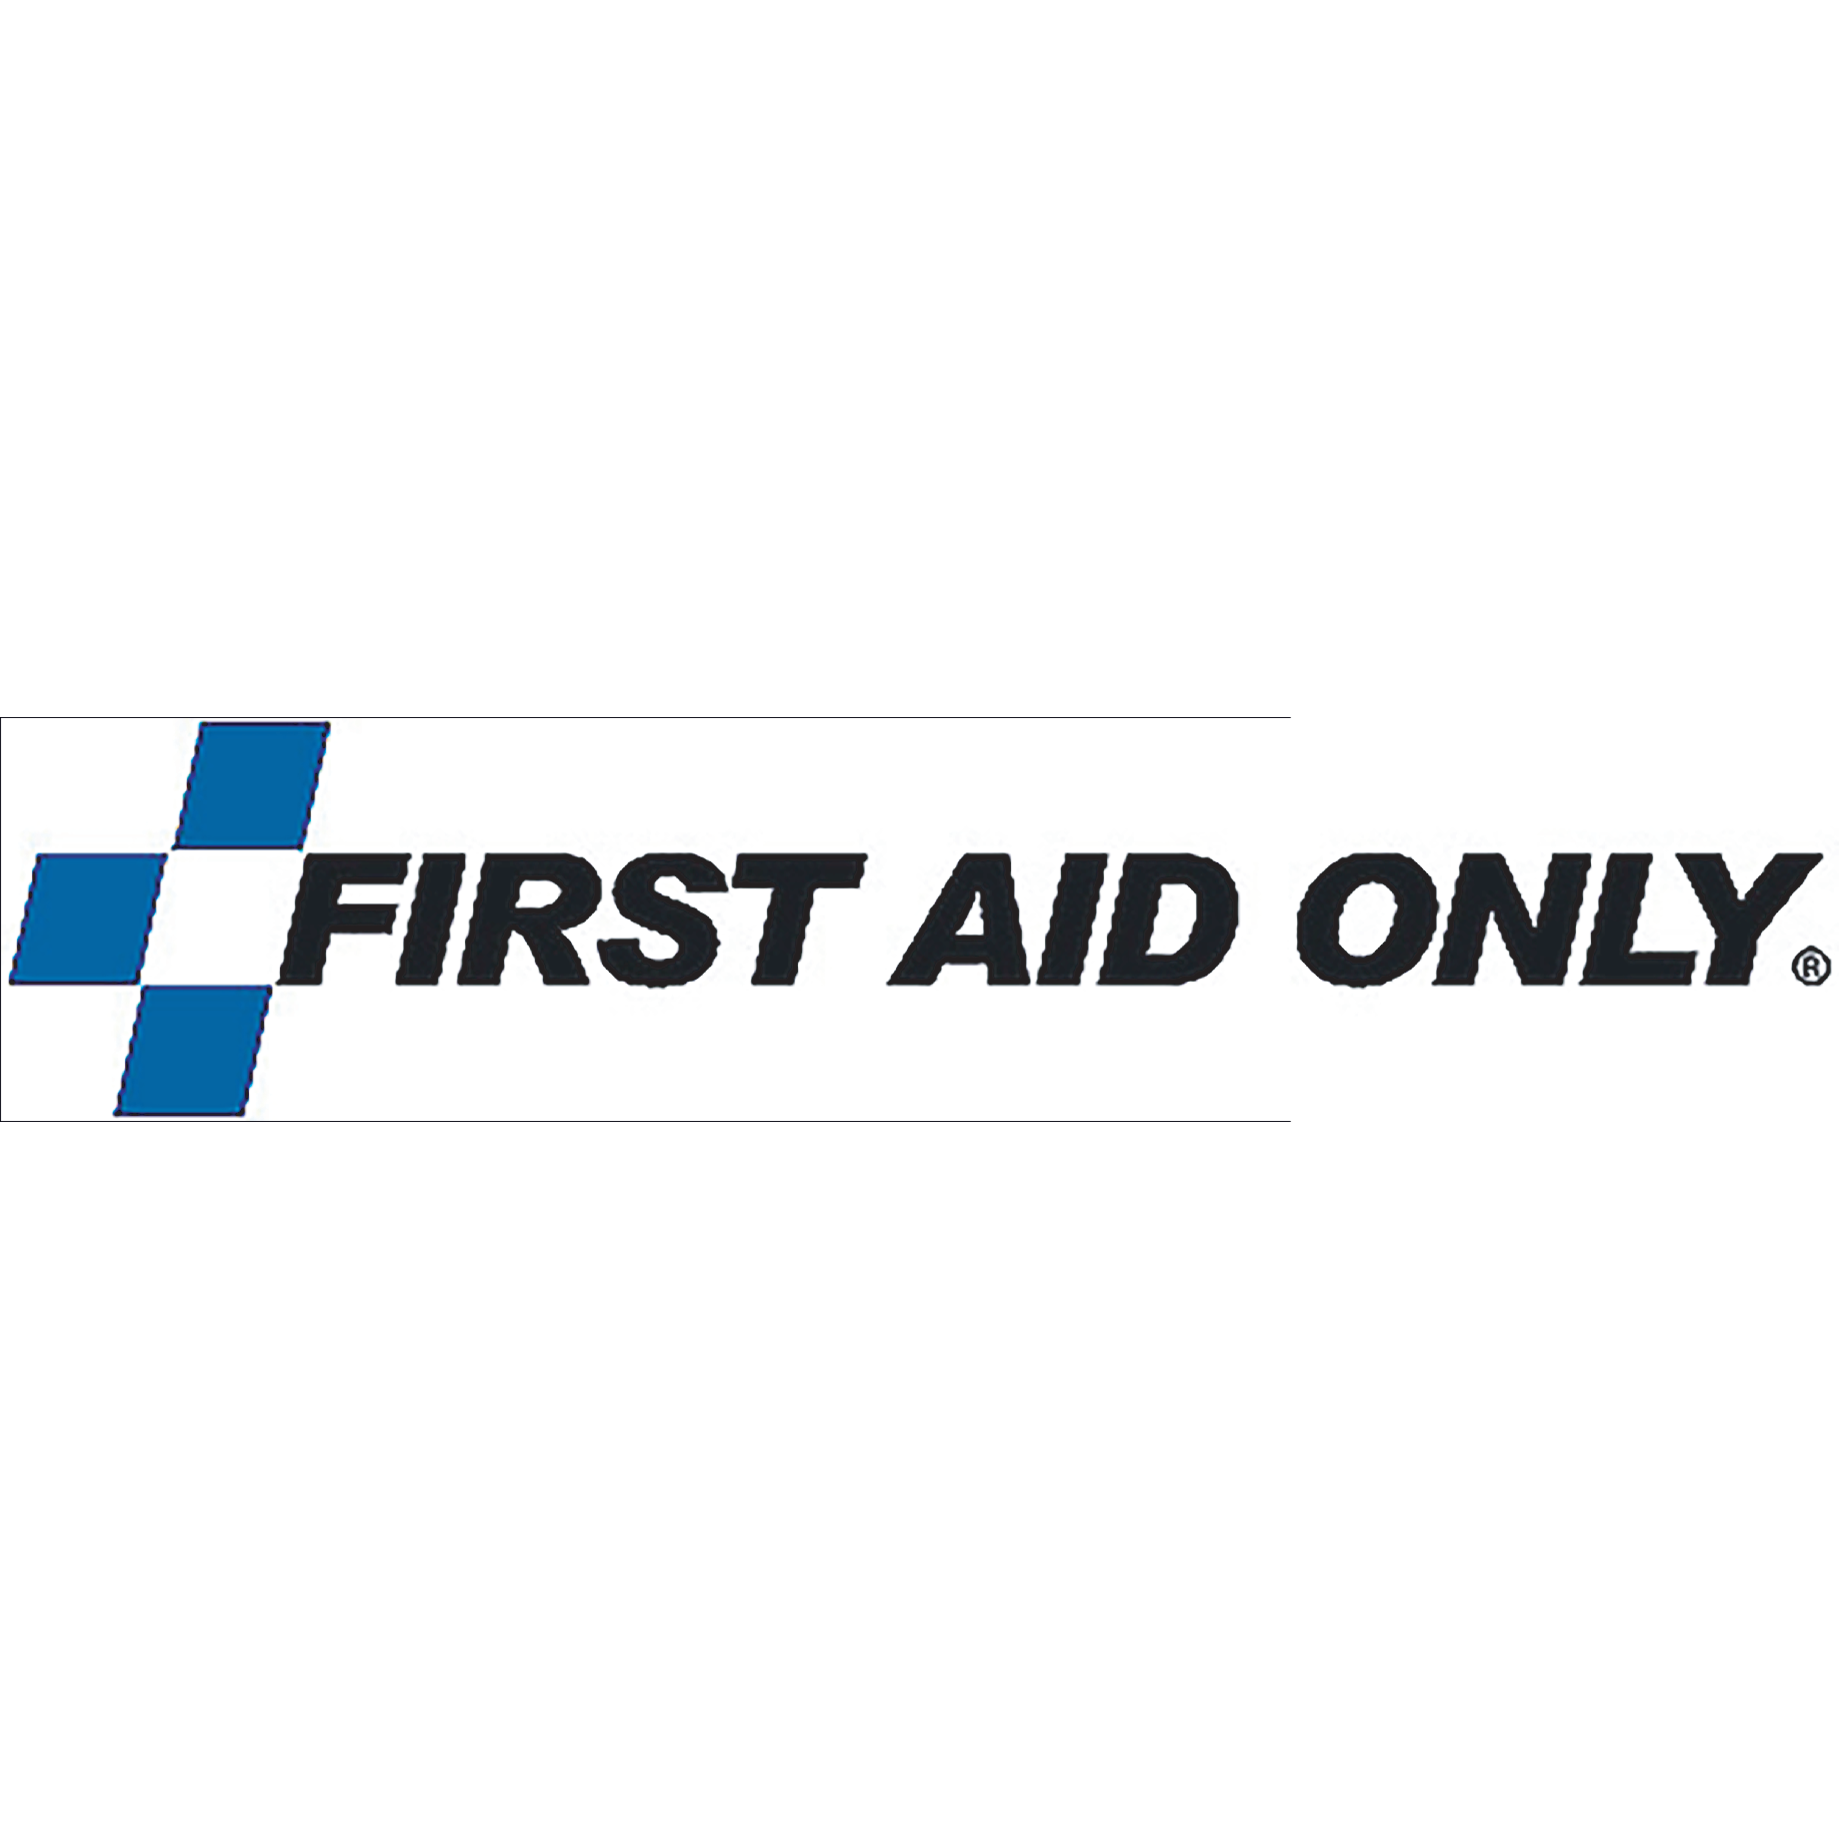 FIRST AID ONLY®